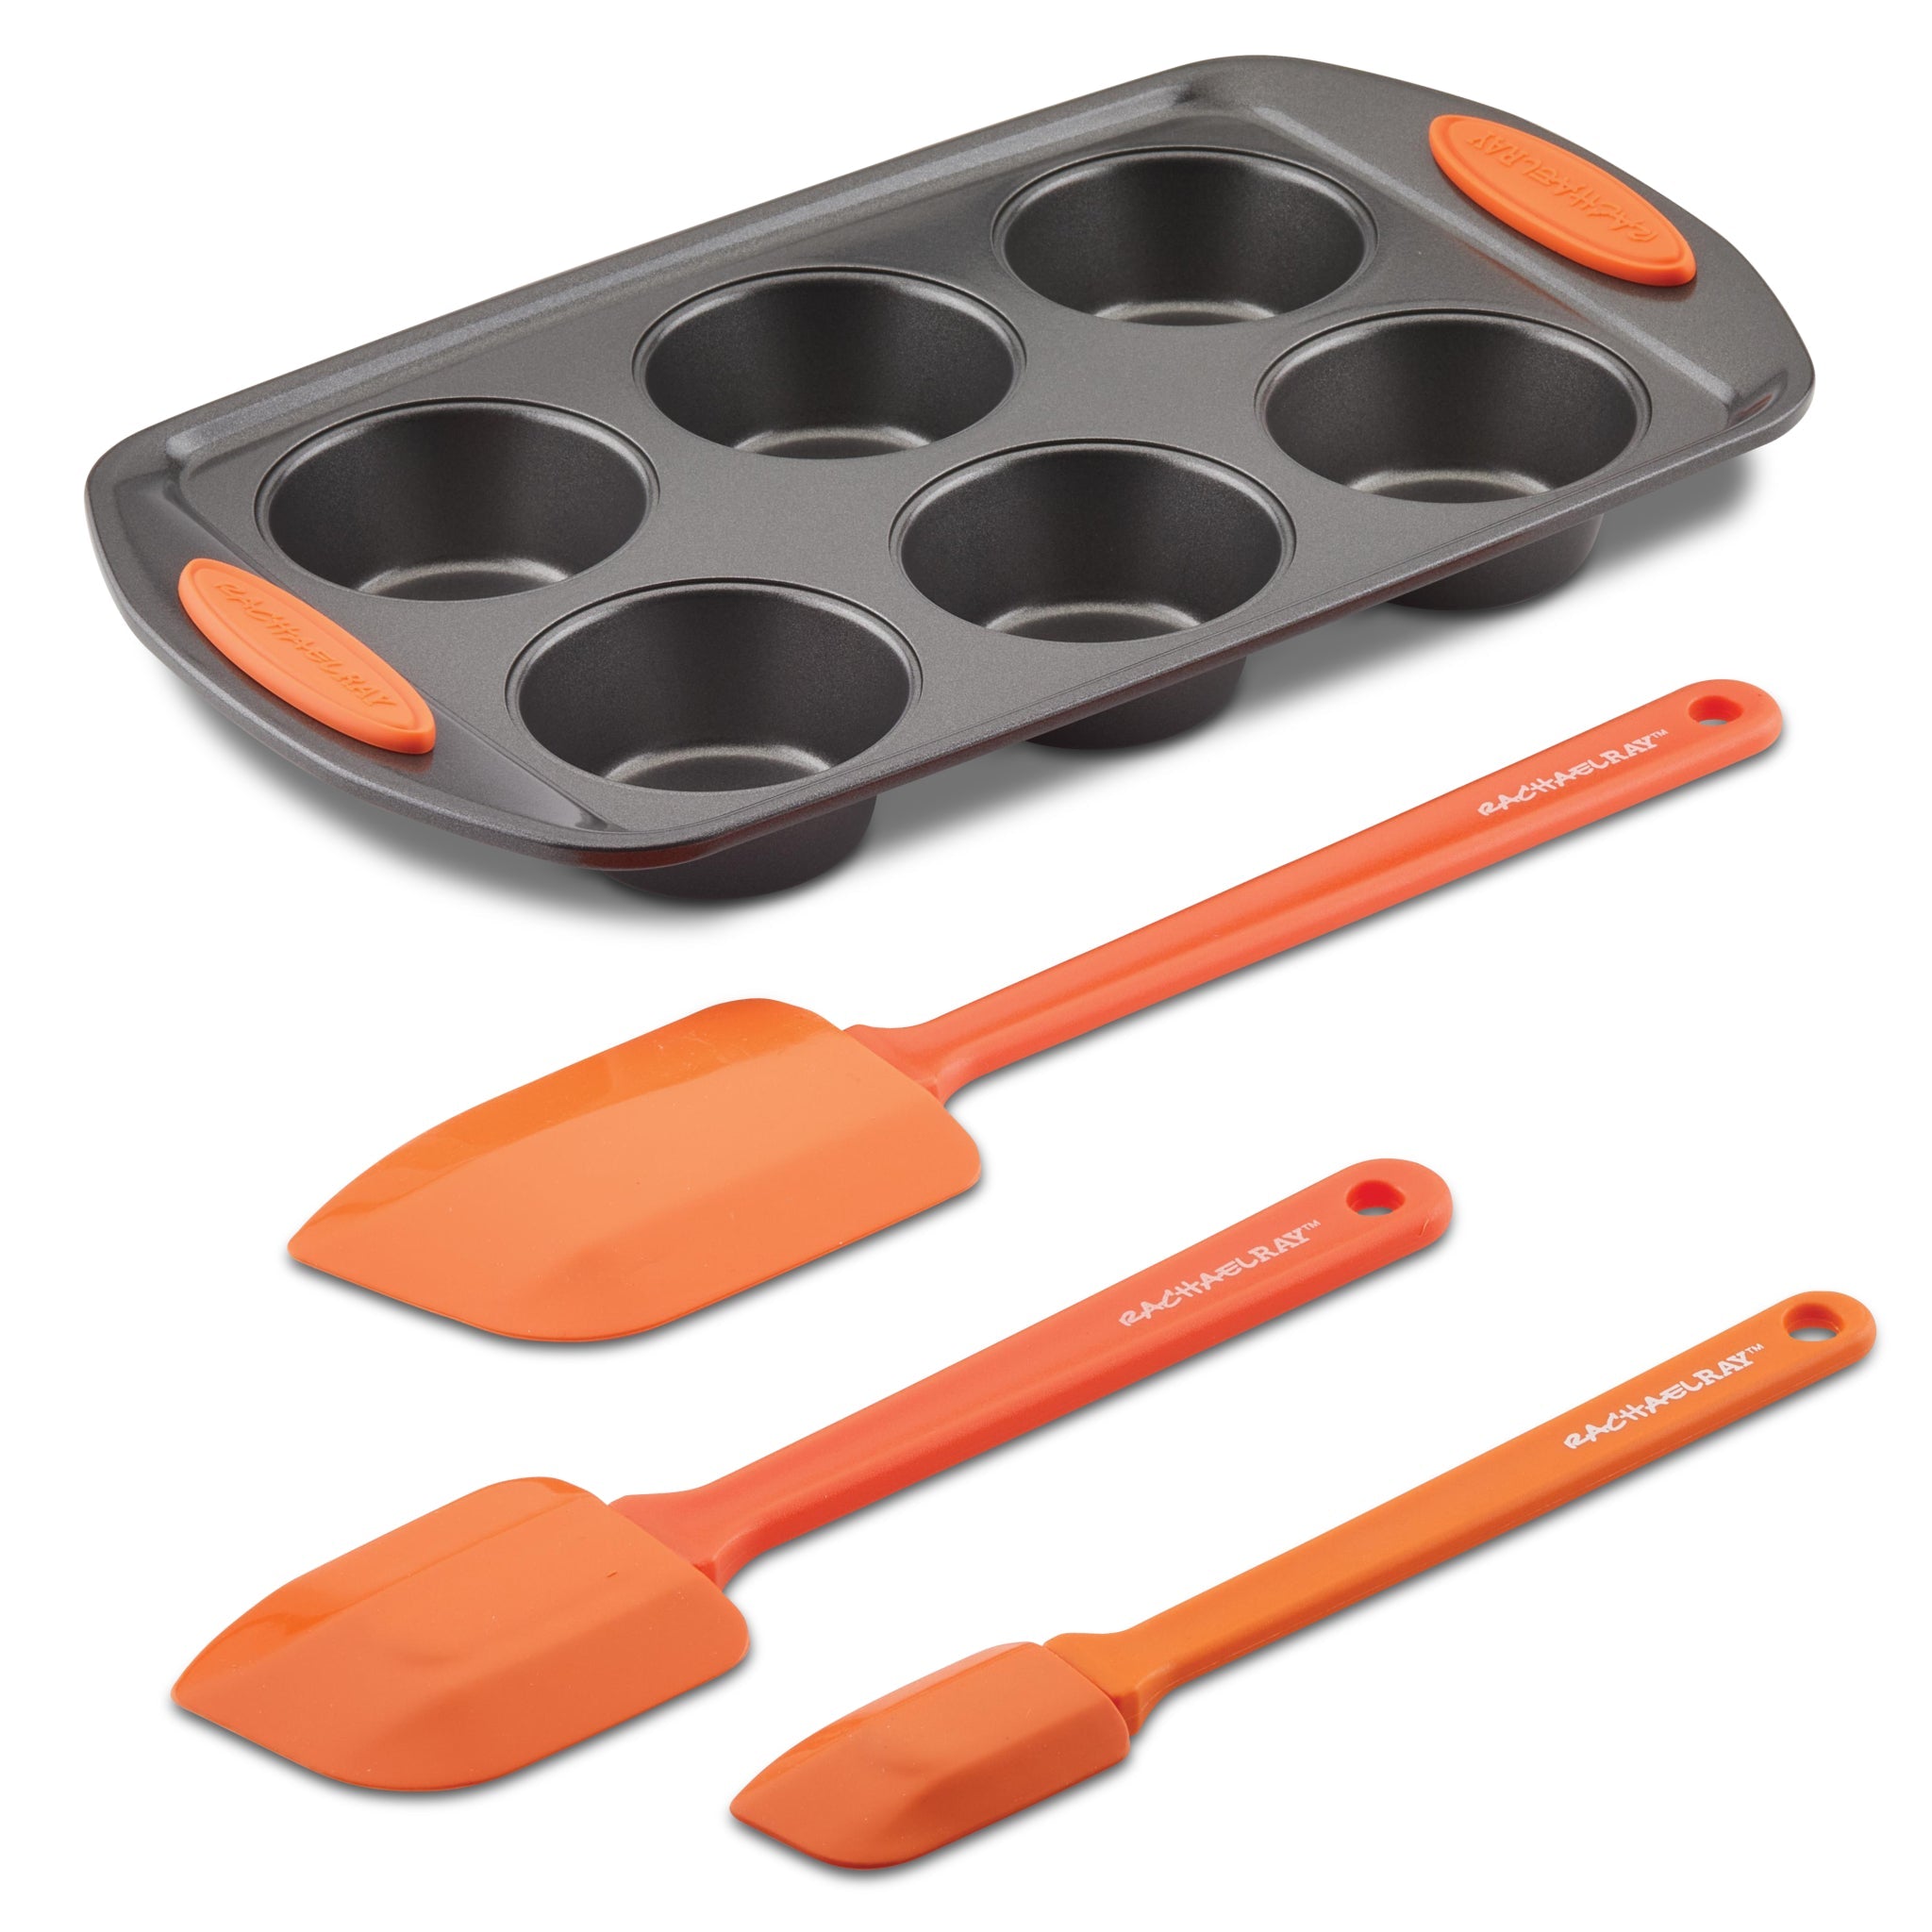 4-Piece Nonstick Cupcake and Muffin Making Set